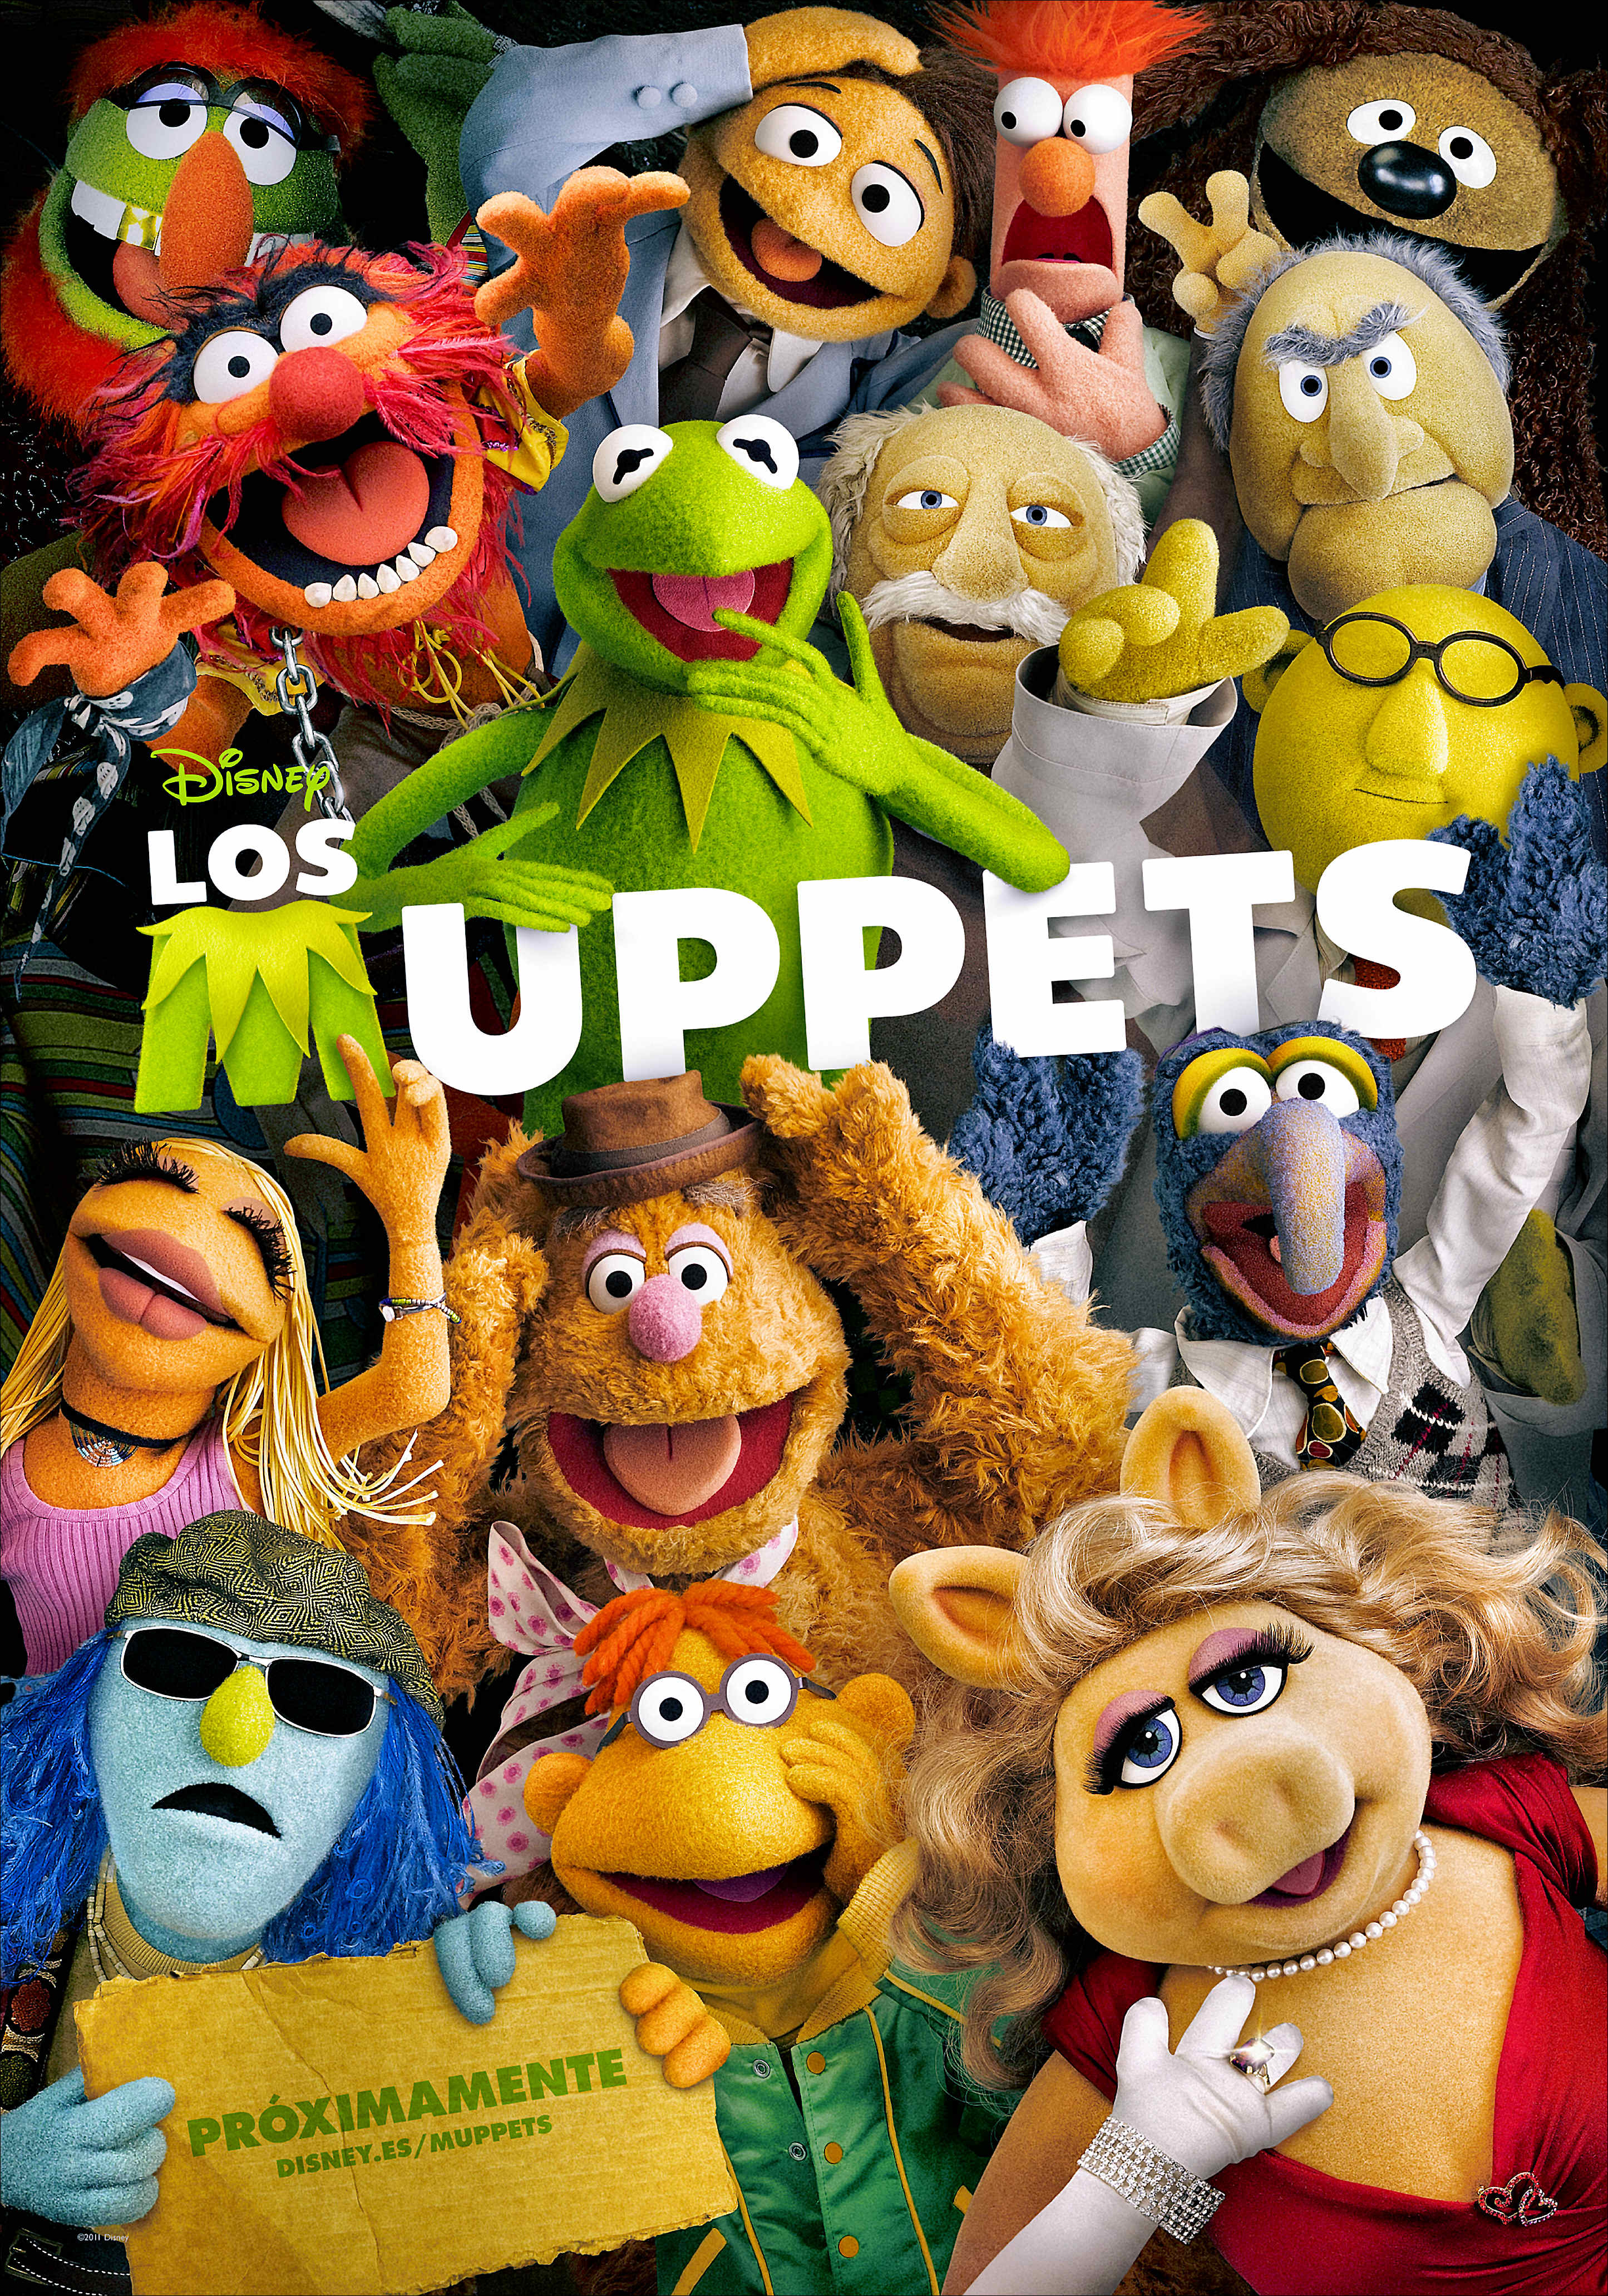 HQ The Muppets Wallpapers | File 1781.54Kb